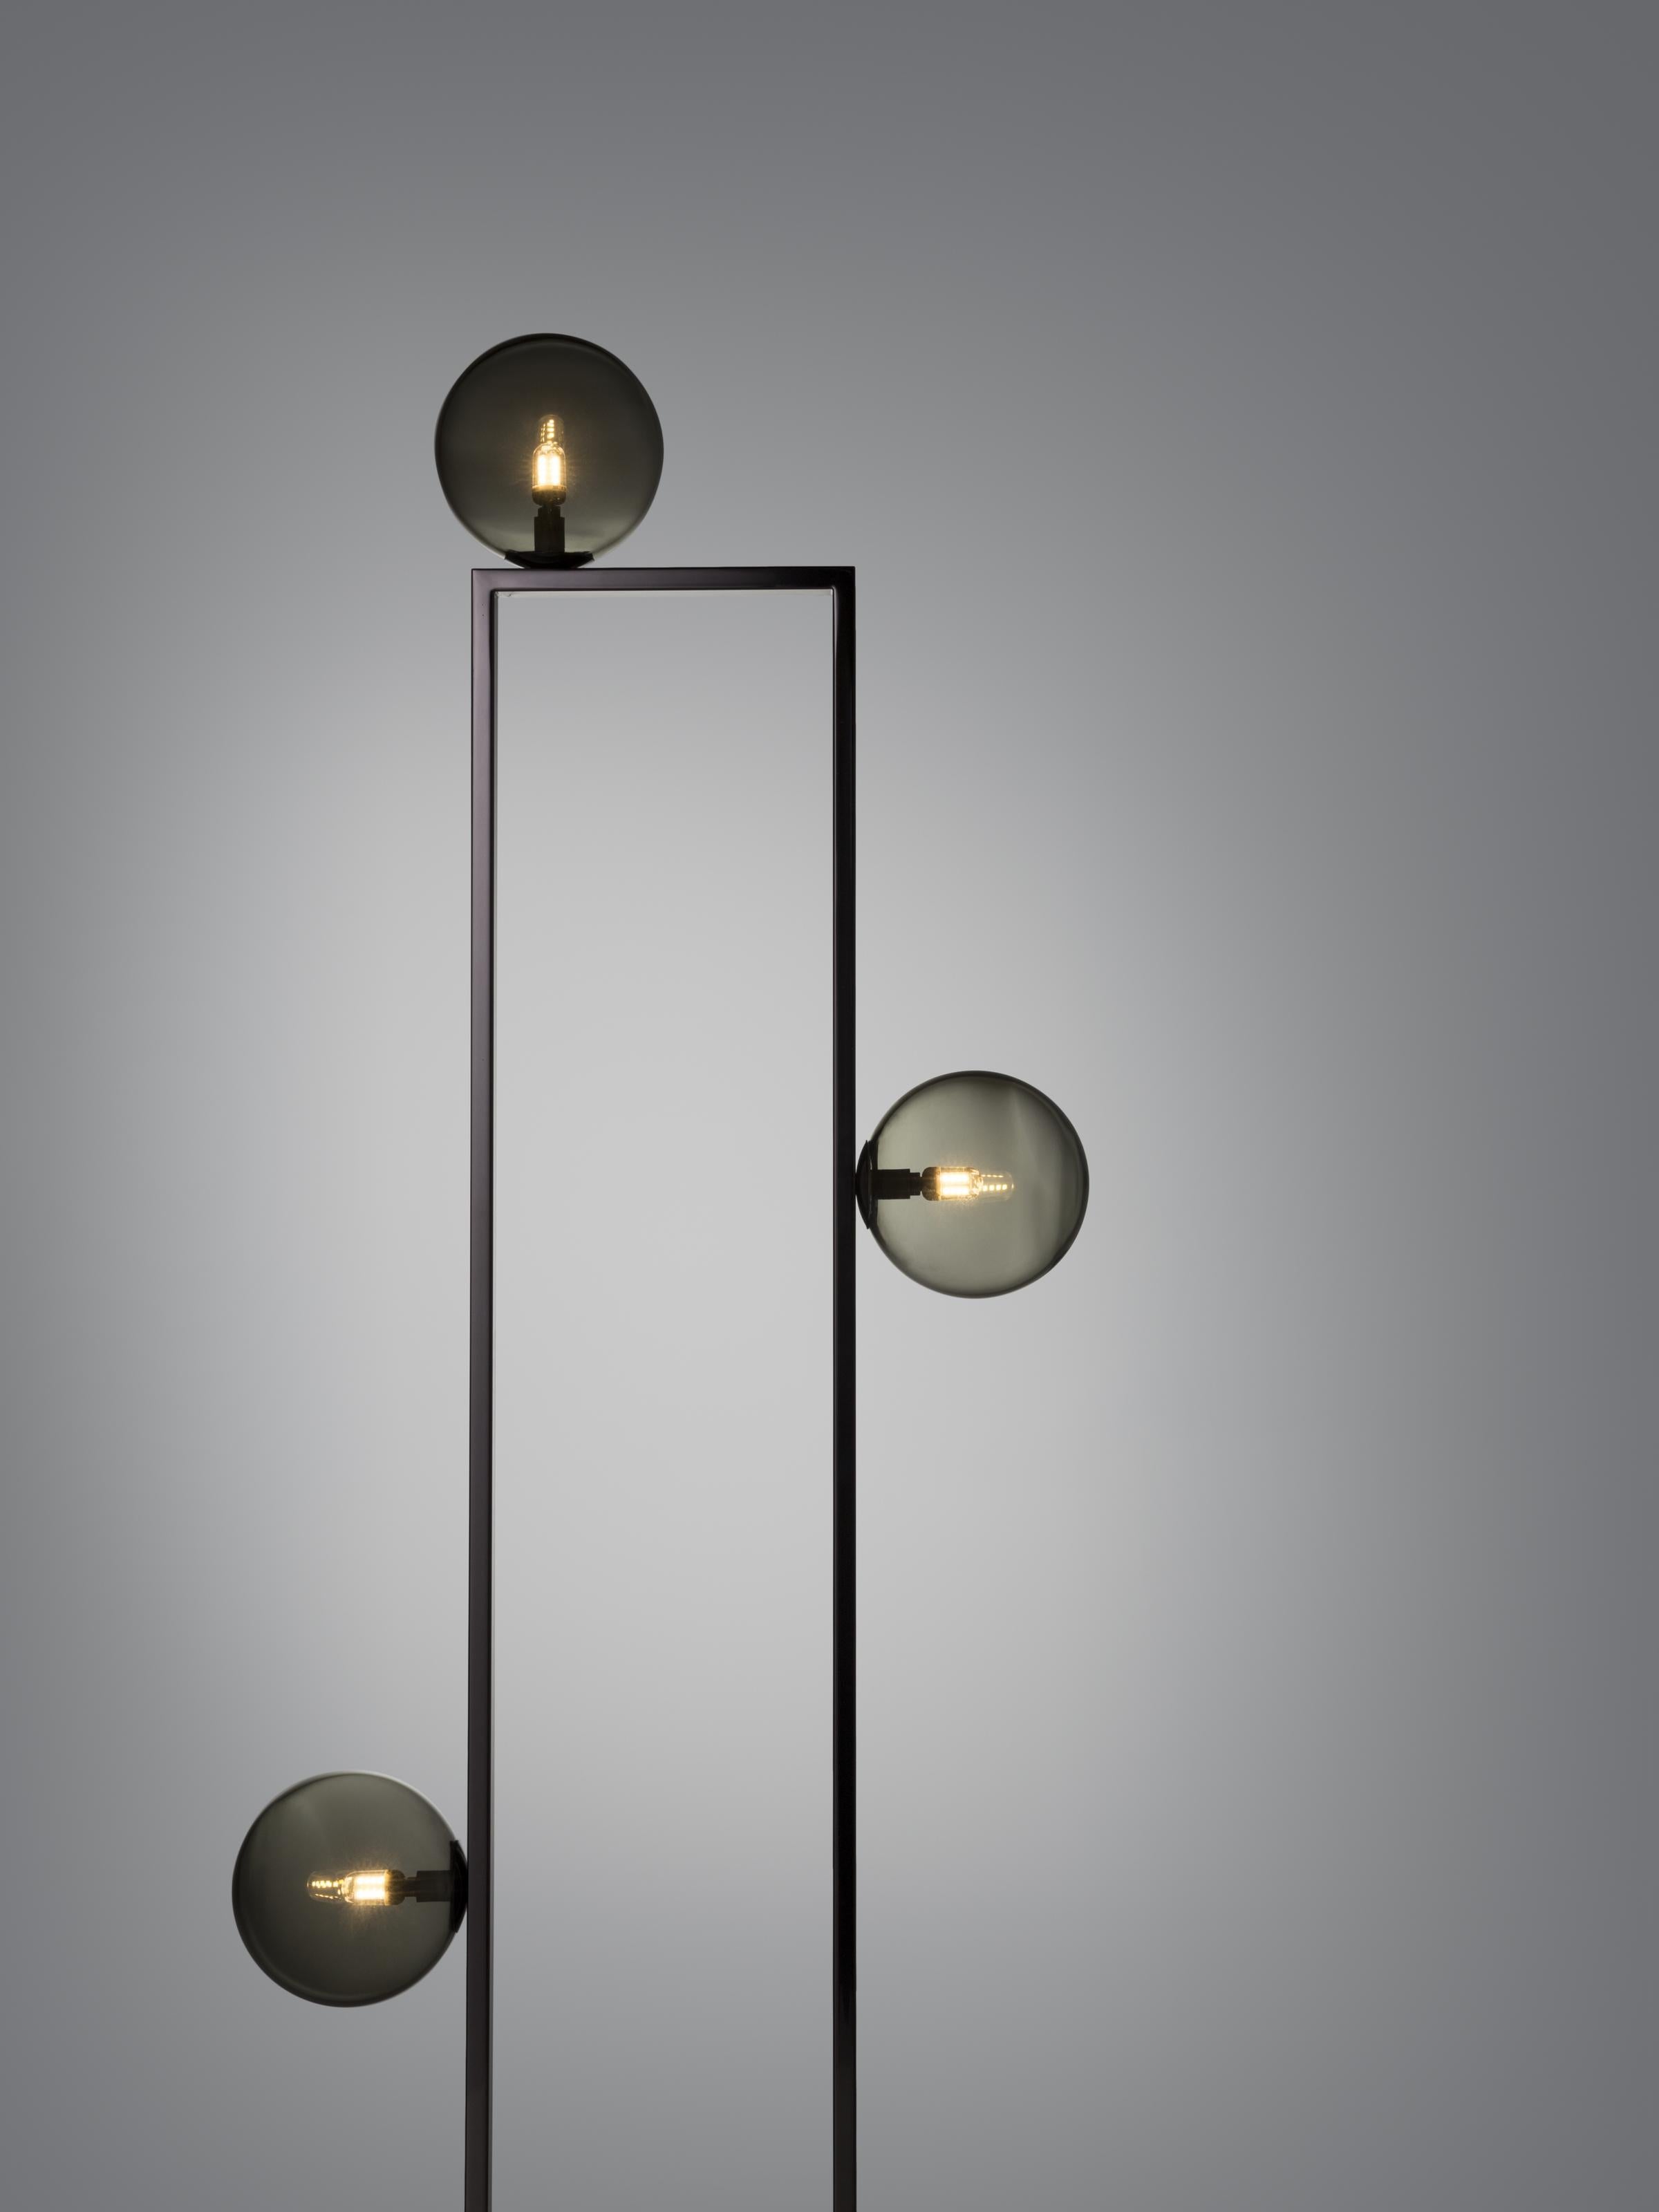 The Mondrian Floor Lamp is inspired by the painter Piet Mondrian and his harmonious use of vertical and horizontal lines. This timeless light combines the rhythm of a geometric glass structure, with handmade Murano glass spheres.